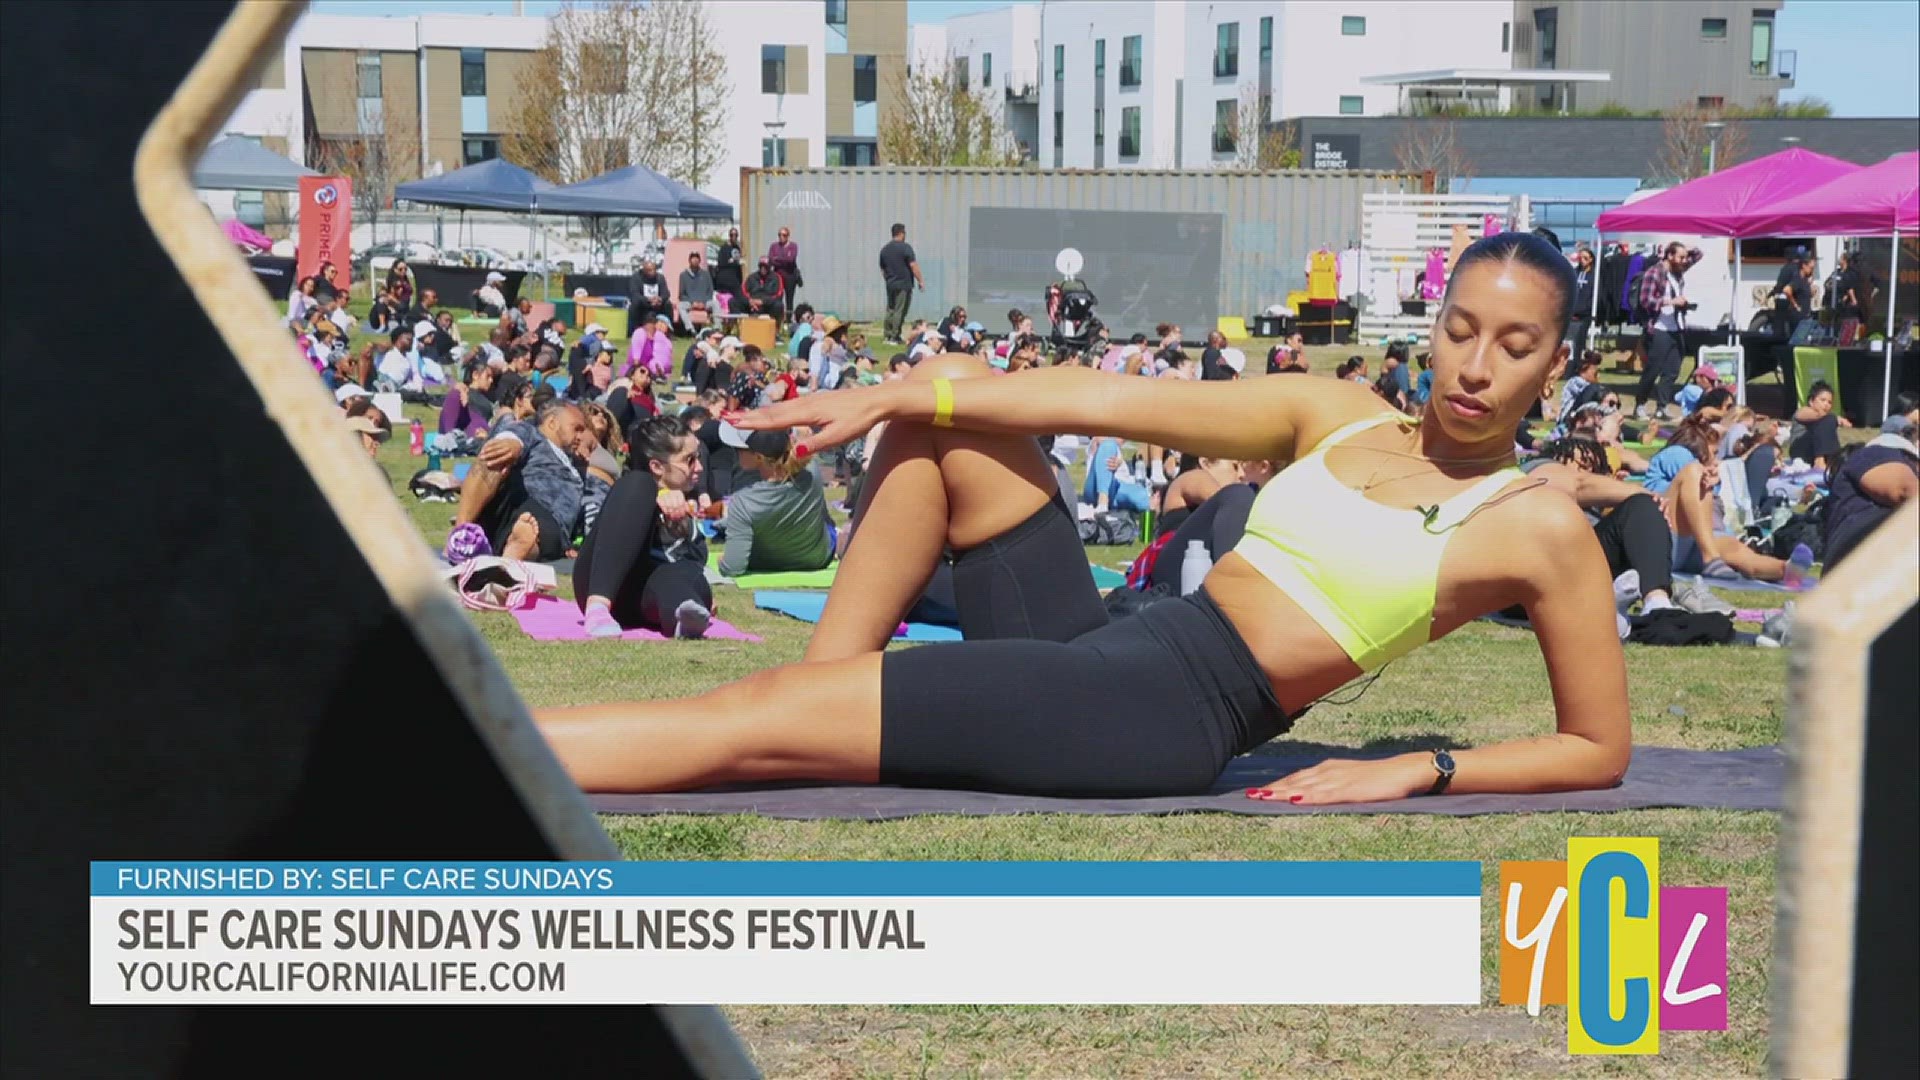 This family-friendly and open-to-everyone event includes a wide range of activations for relaxing, rejuvenating and reconnecting with themselves.